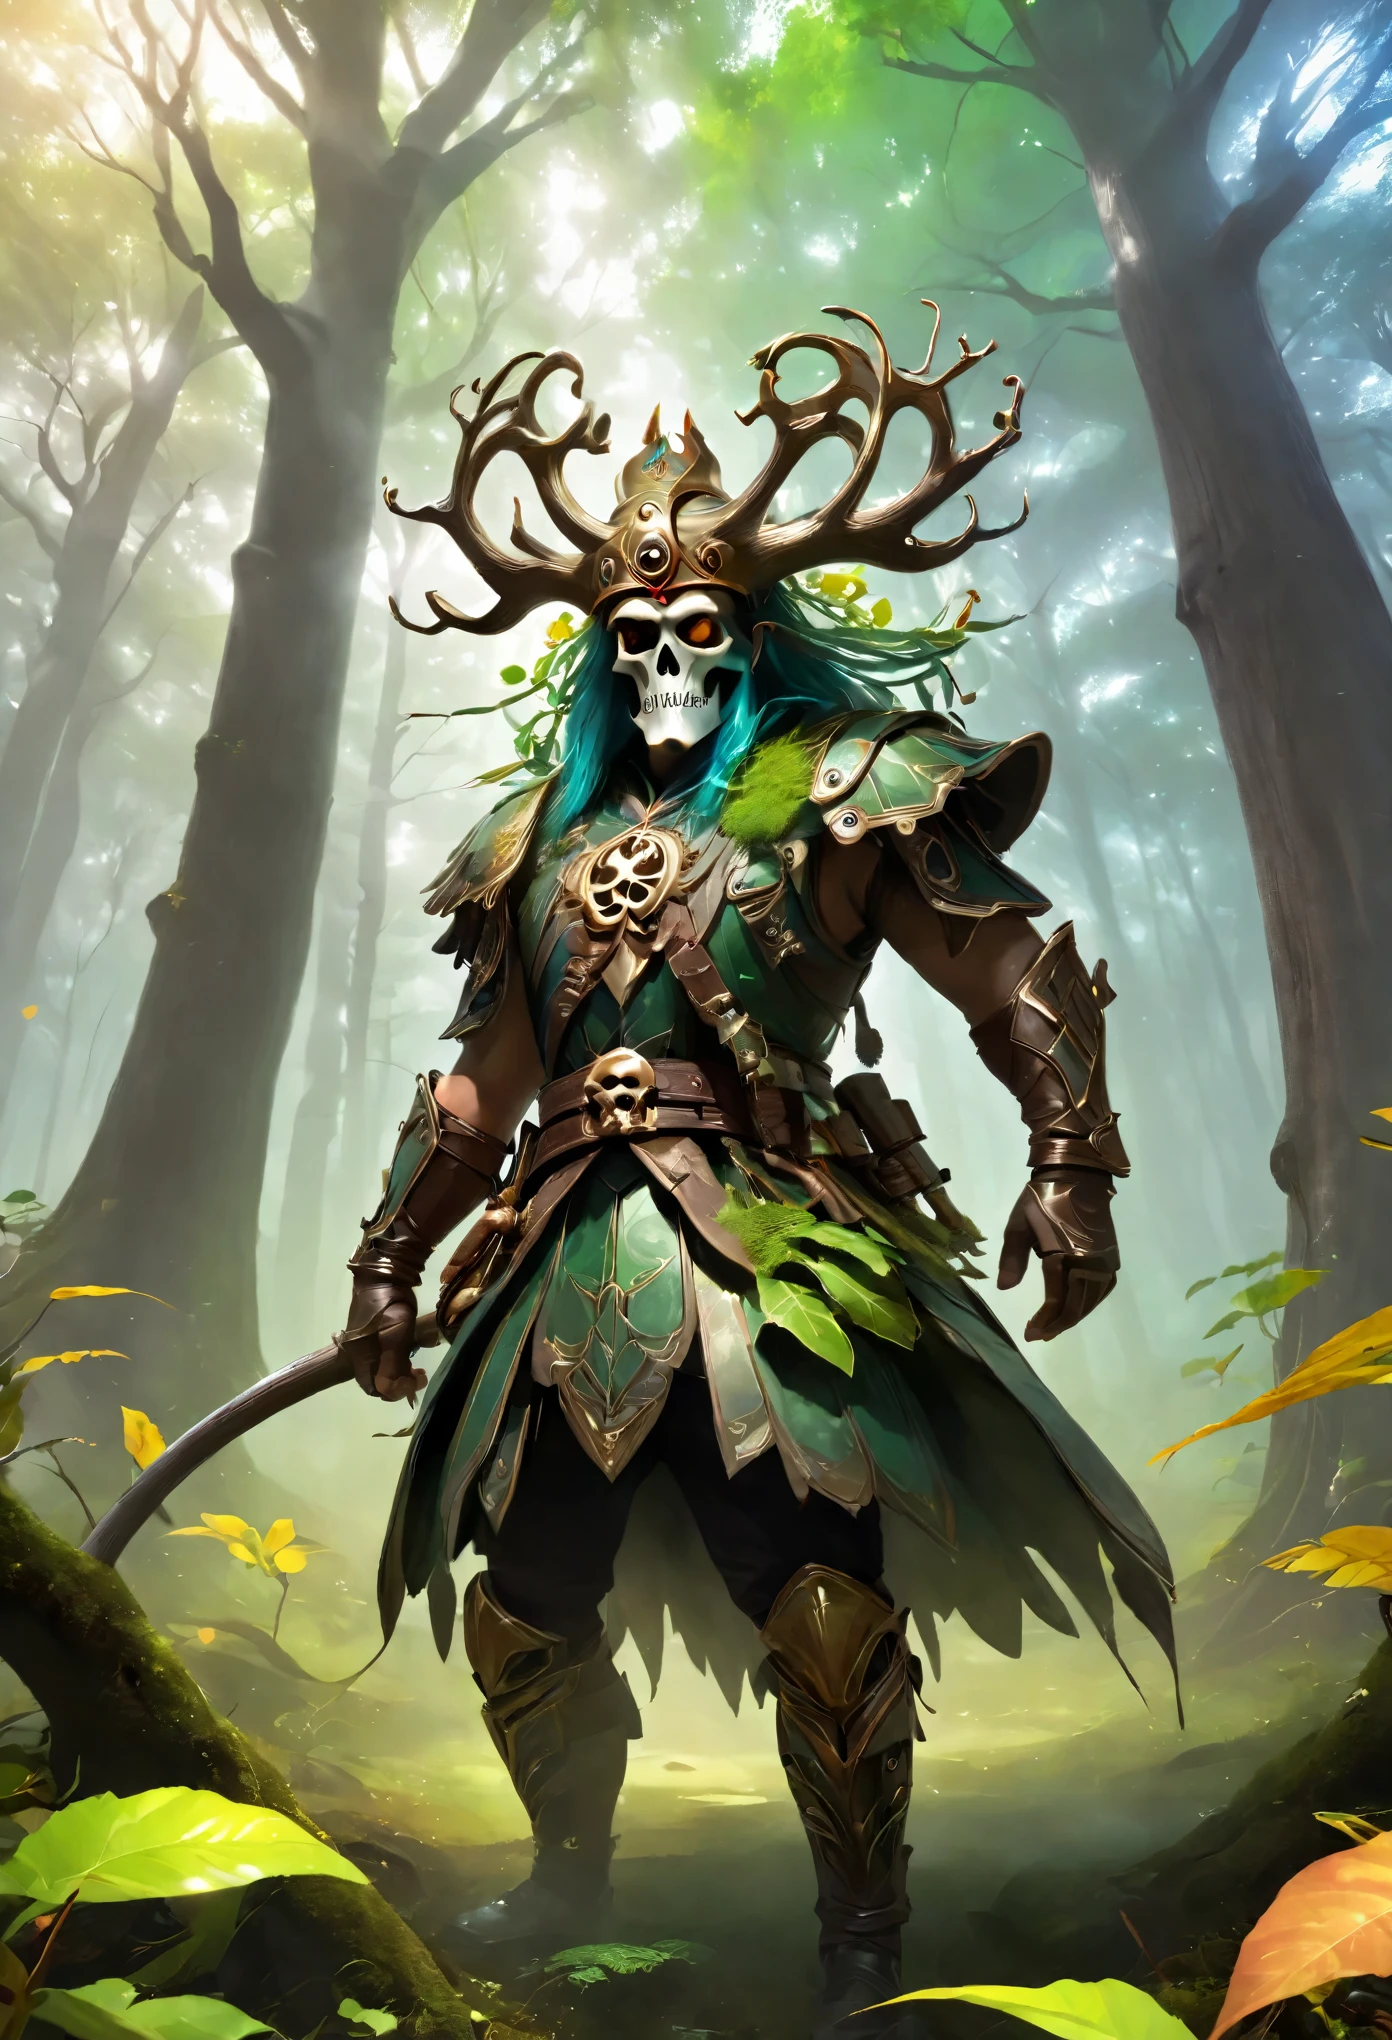 foreground: 1.3, (Masterpiece: 1.5), (Best Quality: 1.6), (ultra high resolution: 1.4), strong and robust green ogre, dynamic pose, with shoulder pads and leather bones, large and sharp fangs, leather belt with a skull, loincloth, detailed illustration, intricate elves, idyllic and magical in the forest: 1.5, landscape, colores Vibrants, sunrise, sun rays passing through the trees, leaves falling from the trees, dew on leaves and plants, clouds, ( (magical, beautiful, from another world, trees:1.4)), ((Best Quality, Vibrant, 32k, clear, well-defined shadows)).